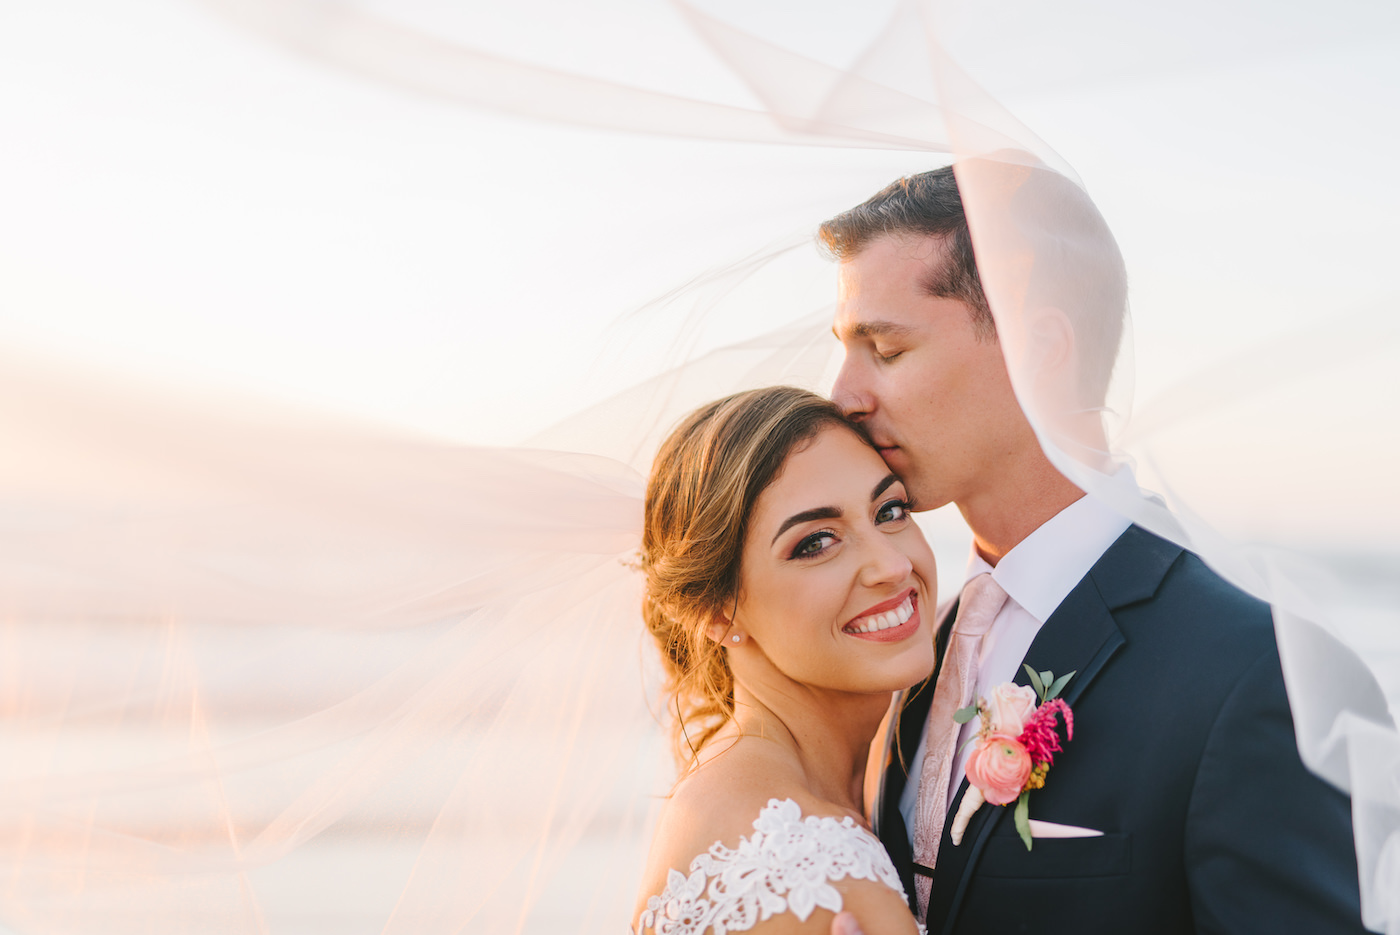 Bride and Groom Outdoor Clearwater Beach Wedding Portrait | Wedding Photography Veil Shot | Tampa Bay Wedding Photographer Kera Photography